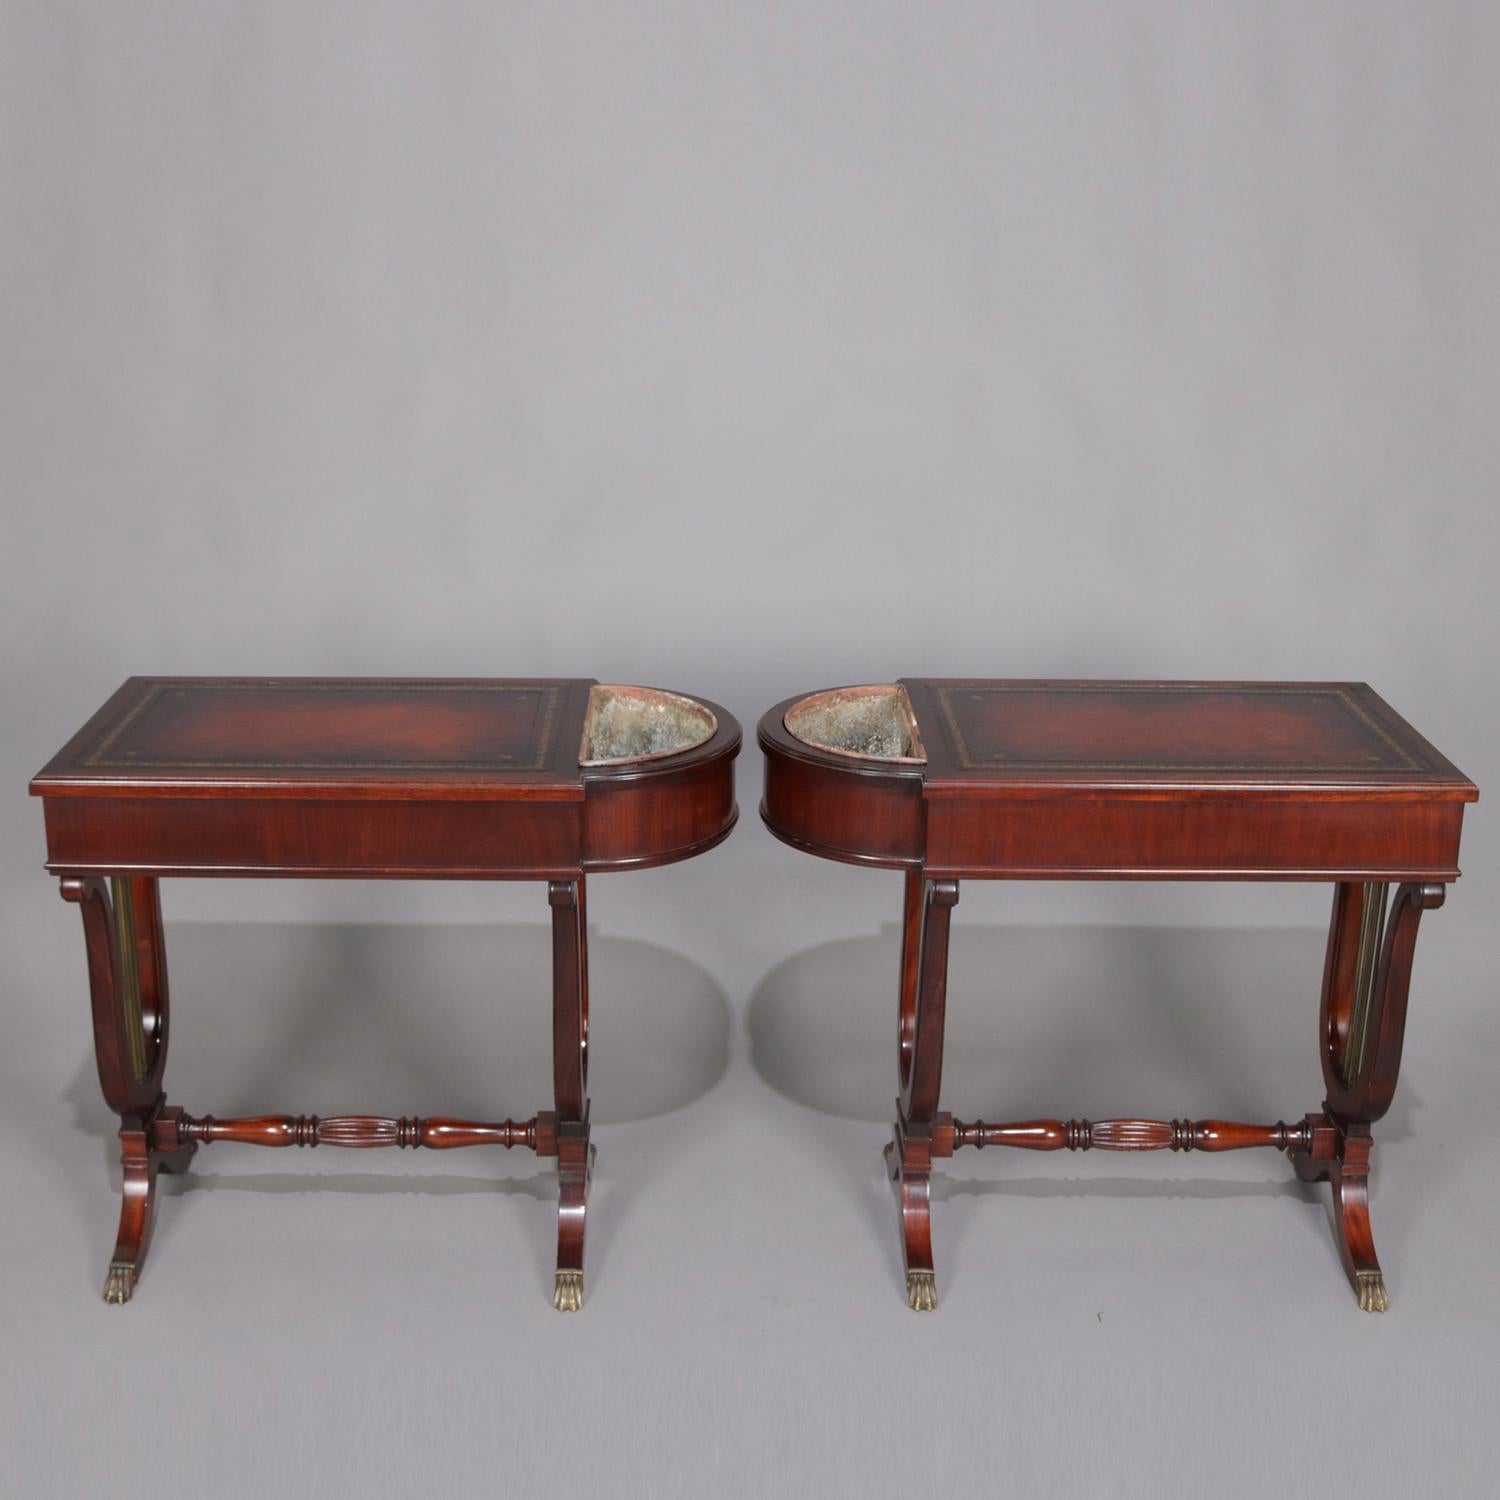 Pair of Duncan Phyfe School side stands feature mahogany construction with leather top case having lined demilune side planters and raised on lyre form legs with turned stretcher and cast bronze feet, circa 1930.

Measures: 26